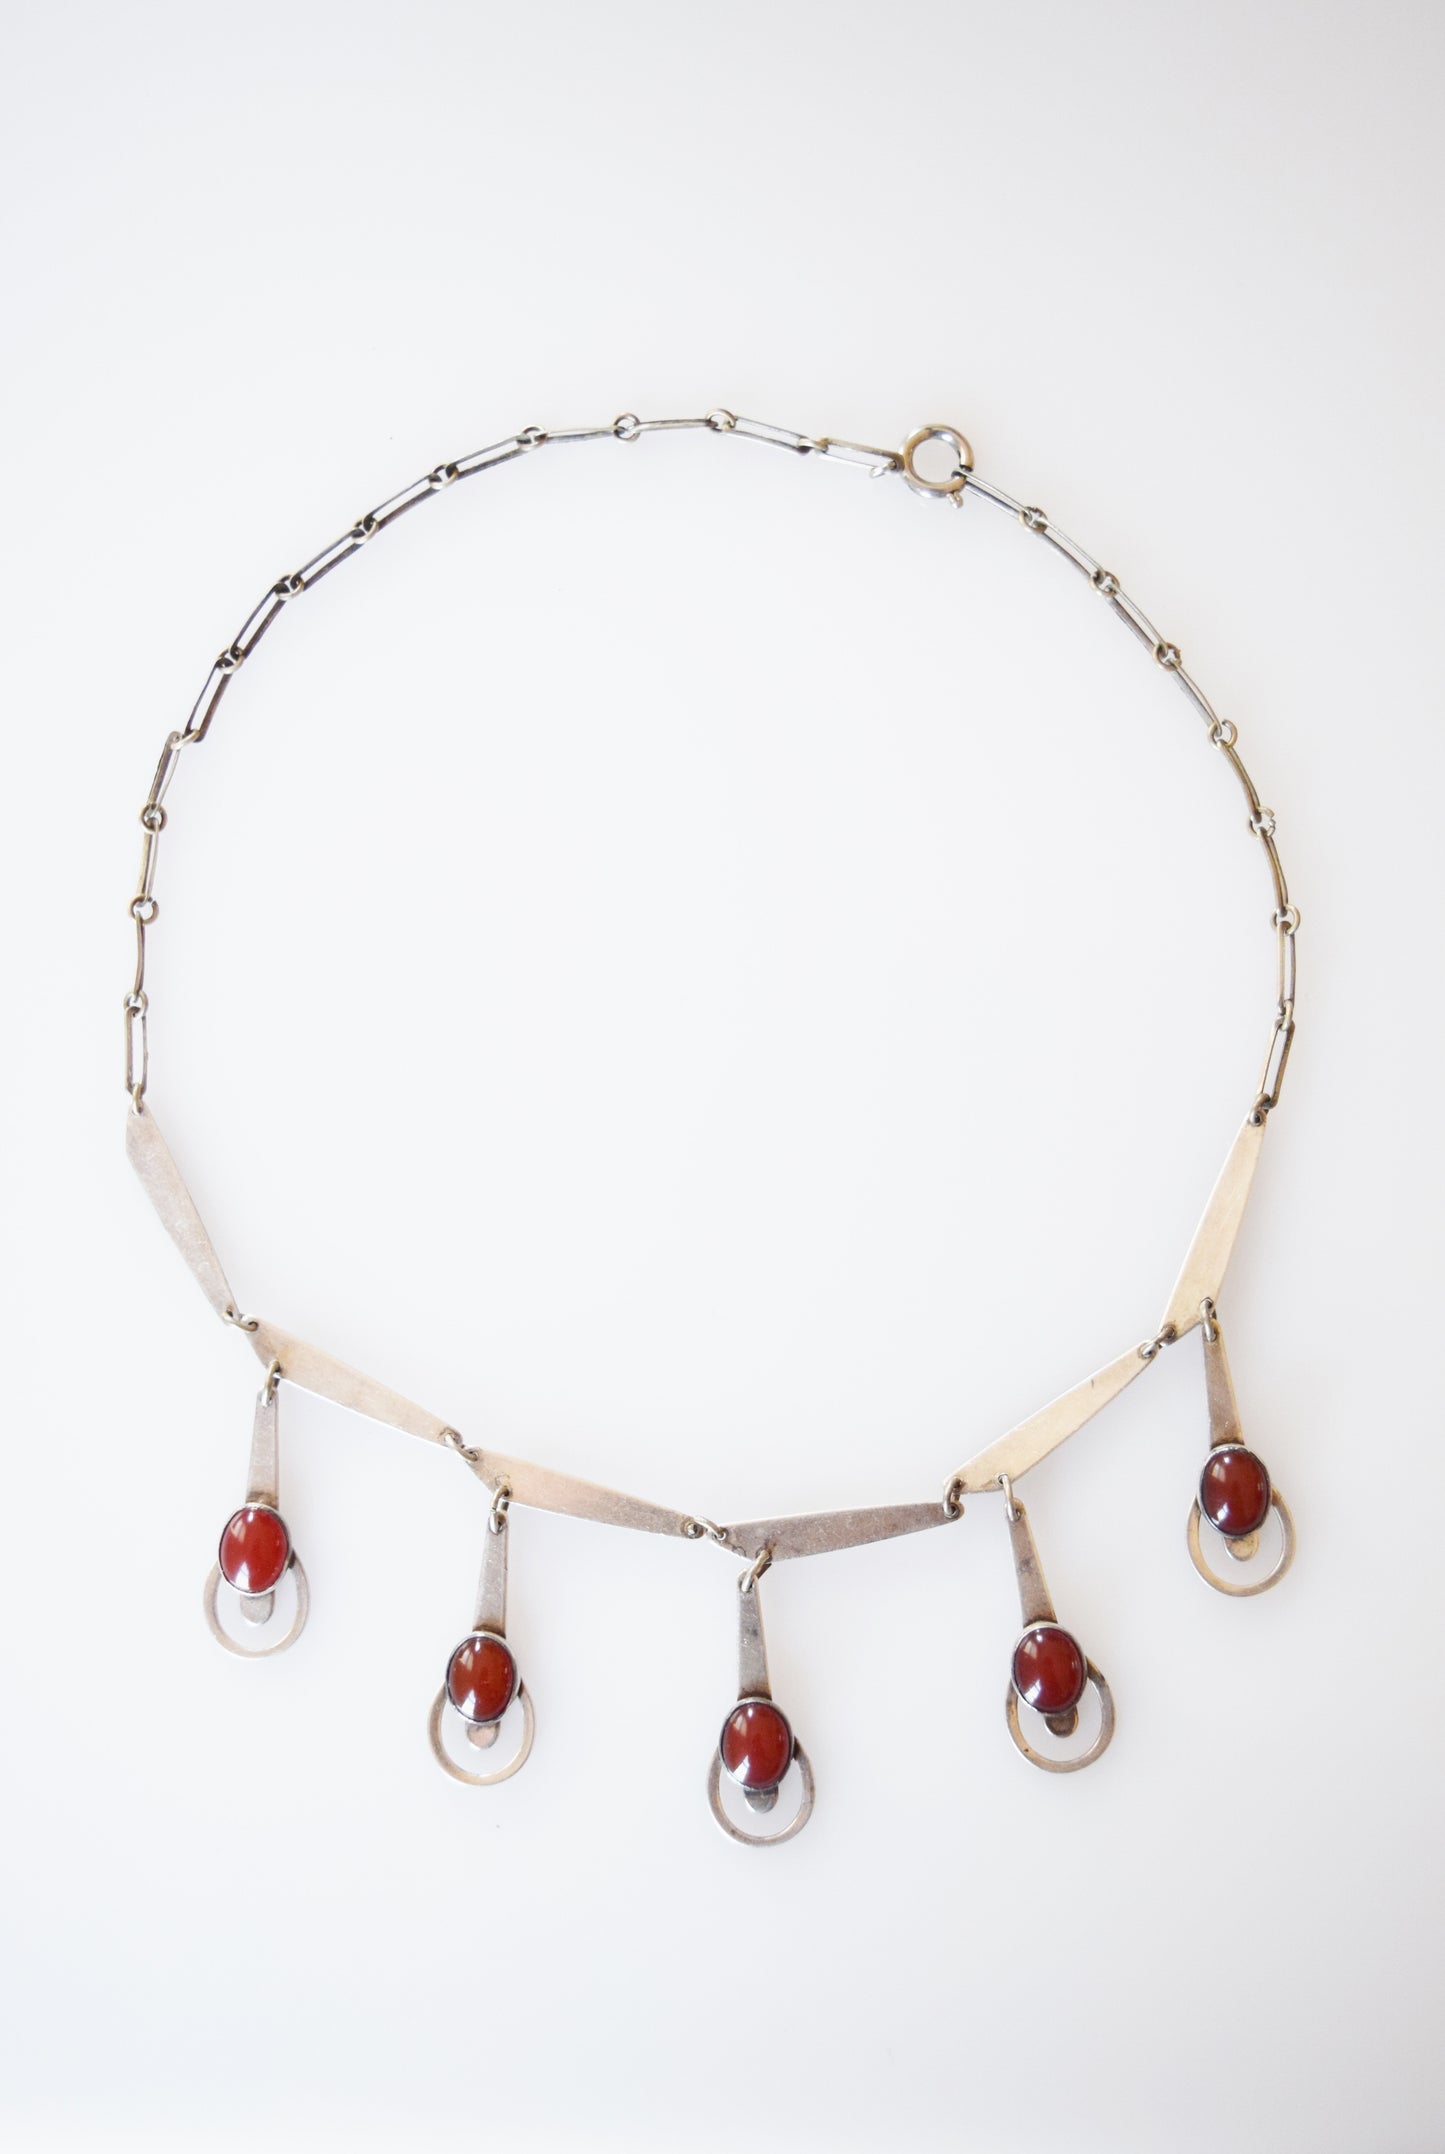 Silver and Carnelian Modernist Necklace